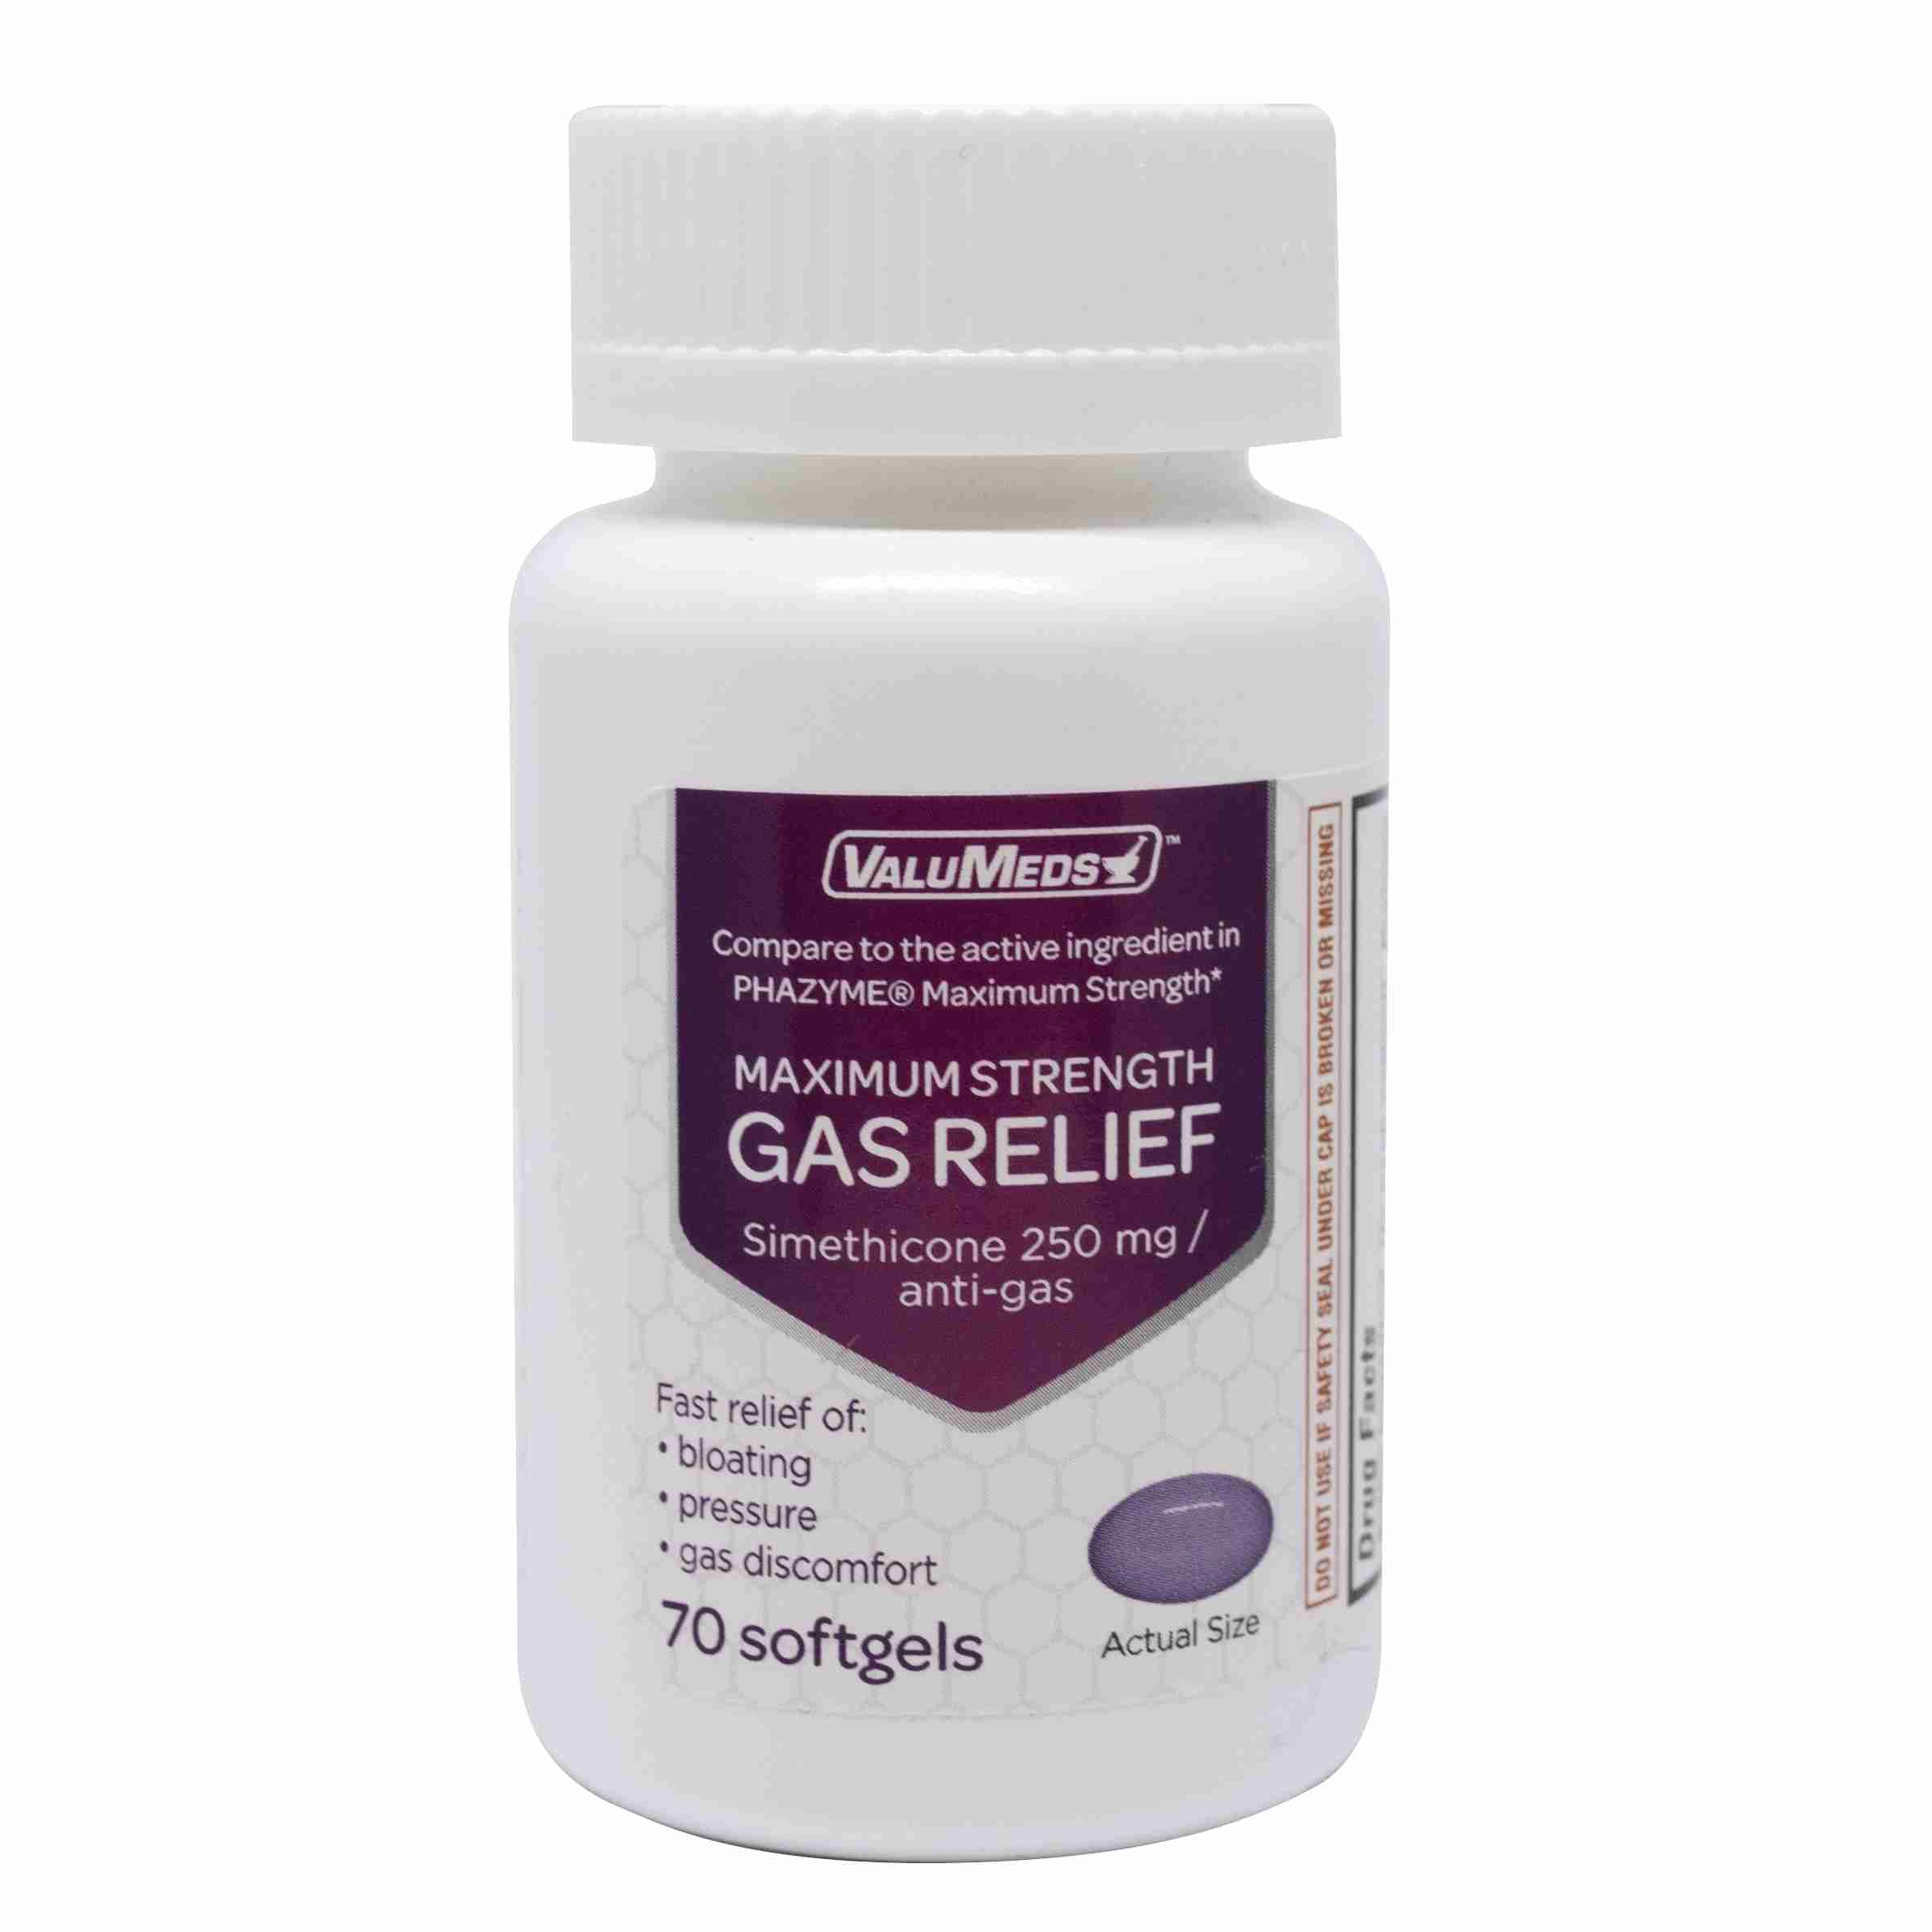 valumeds-max-strength-gas-relief with cash back rebate